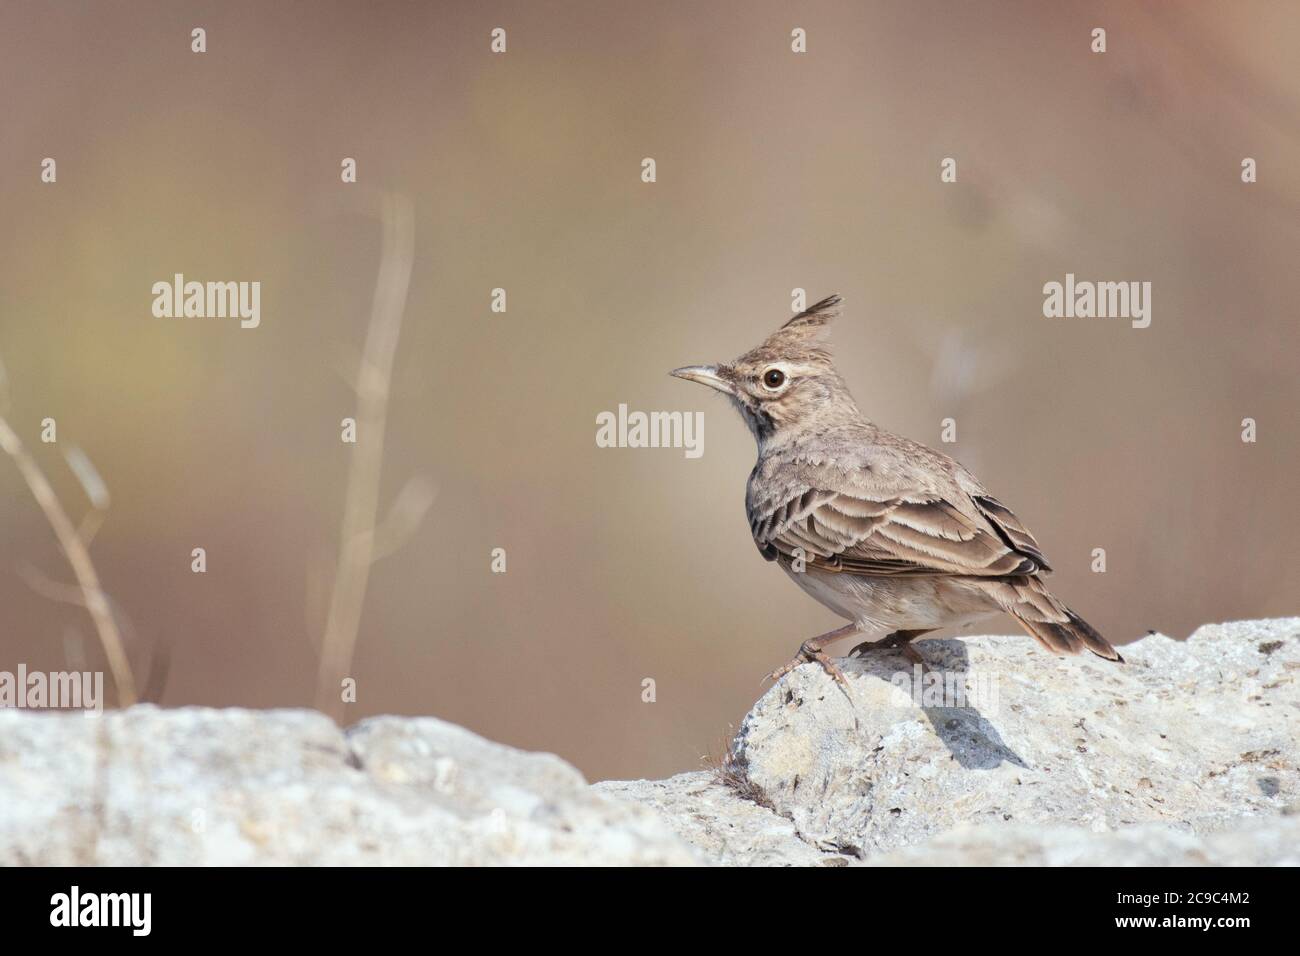 Crested Lark, Galerida cristata, stands on a stone on a beautiful background. Stock Photo